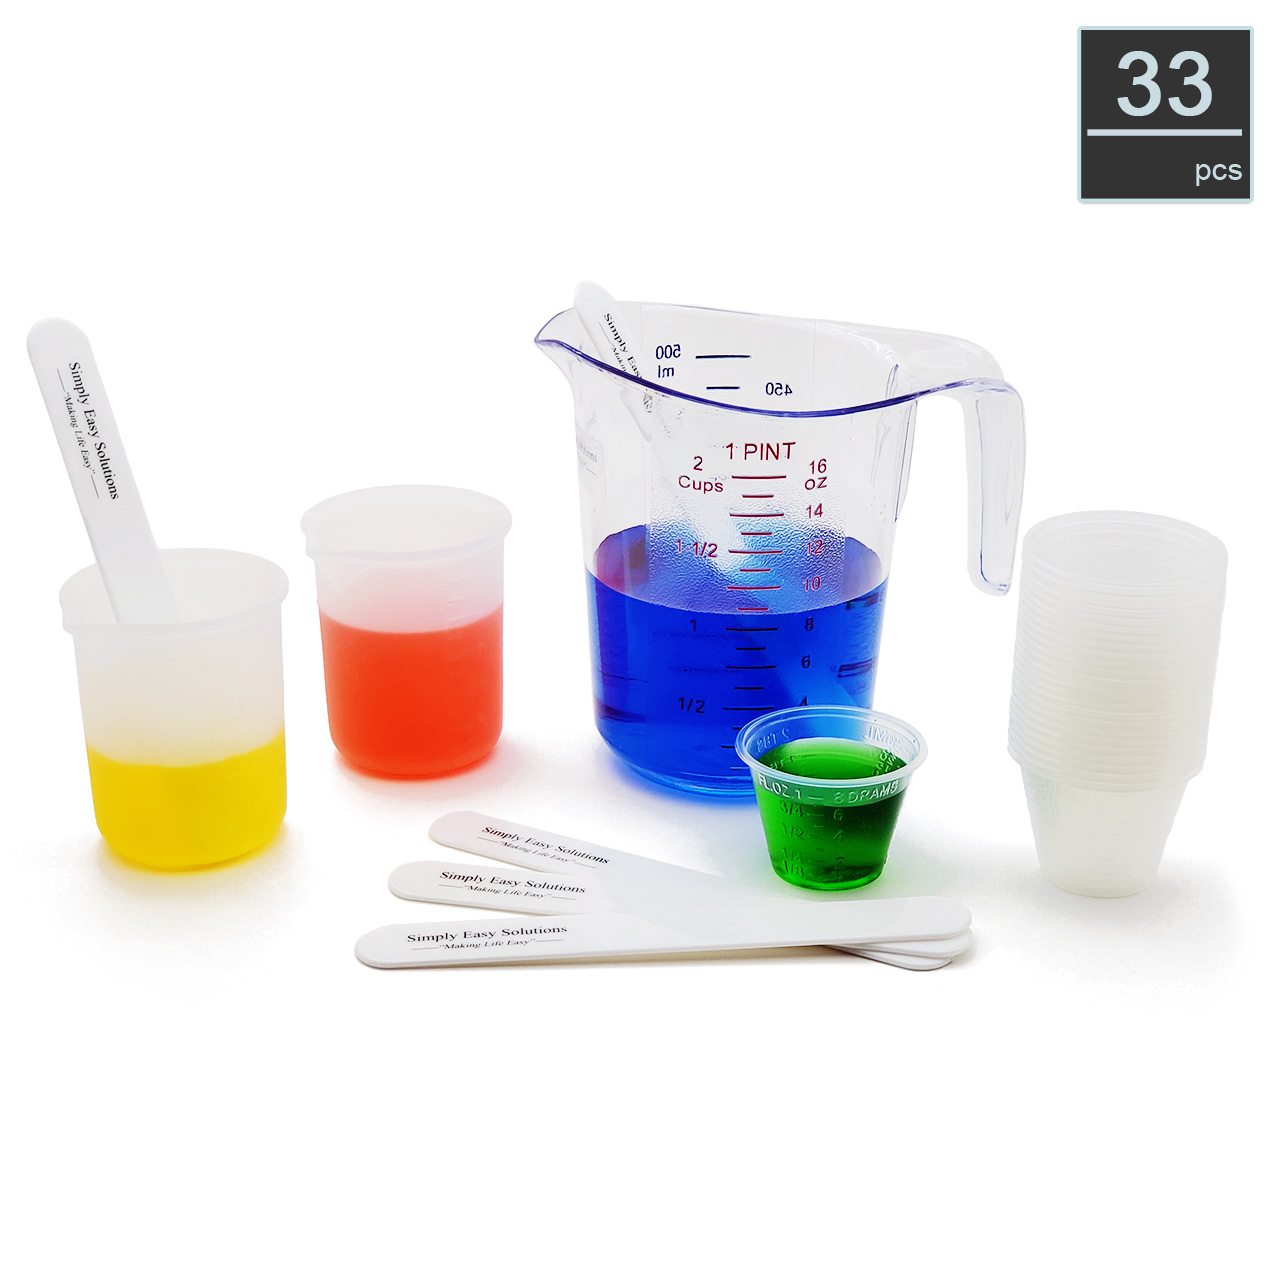 Measuring Cup with Markings for oz., ml, cc, tbs, and drams